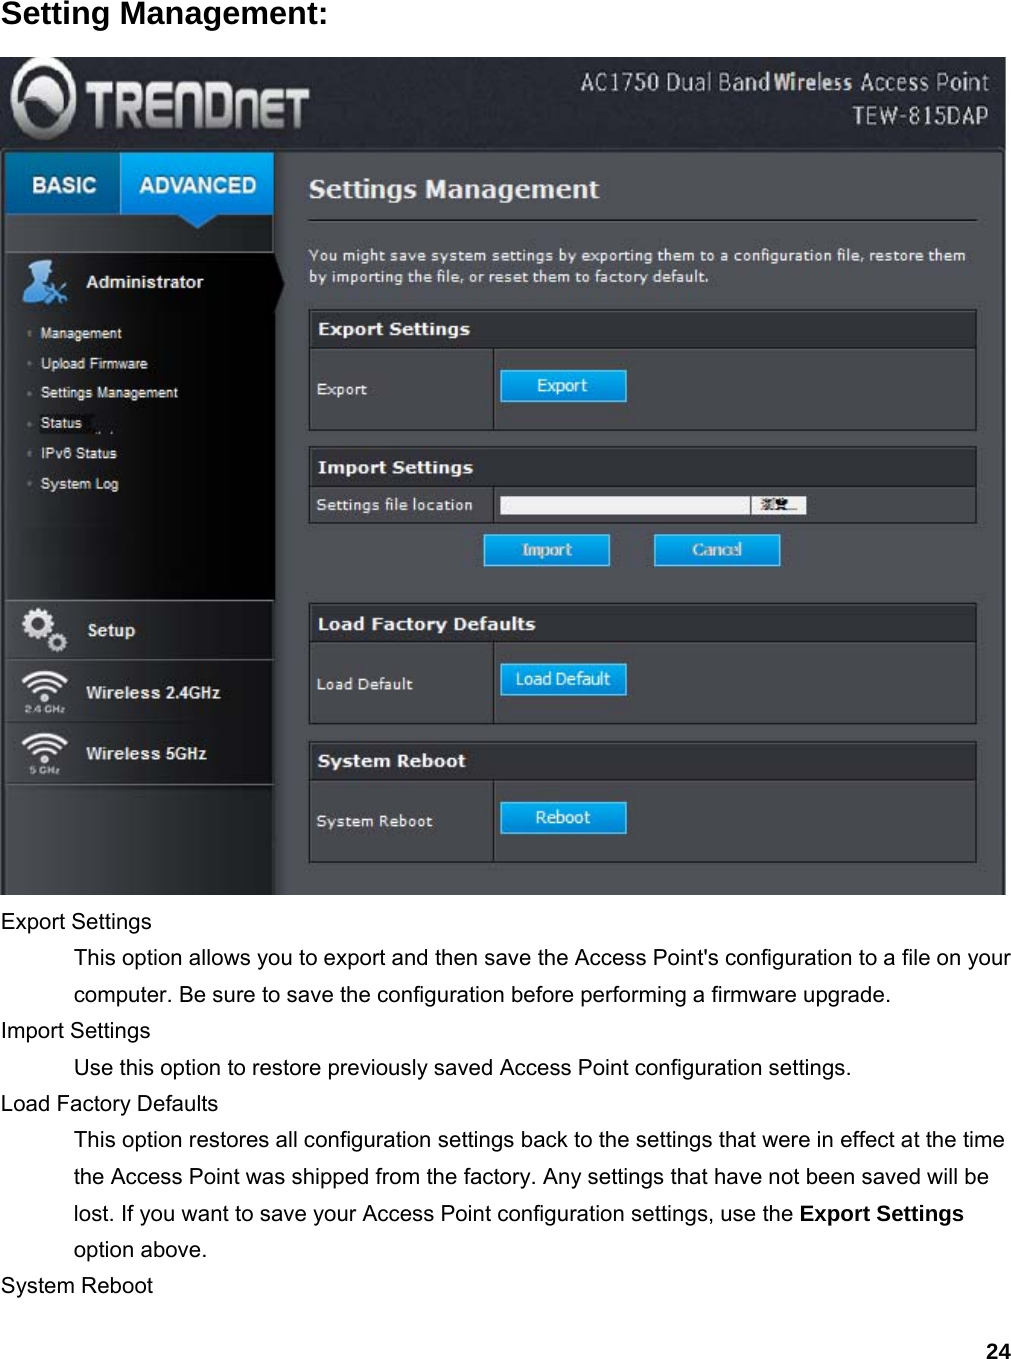 24 Setting Management:  Export Settings   This option allows you to export and then save the Access Point&apos;s configuration to a file on your computer. Be sure to save the configuration before performing a firmware upgrade.   Import Settings   Use this option to restore previously saved Access Point configuration settings.   Load Factory Defaults   This option restores all configuration settings back to the settings that were in effect at the time the Access Point was shipped from the factory. Any settings that have not been saved will be lost. If you want to save your Access Point configuration settings, use the Export Settings option above.   System Reboot   